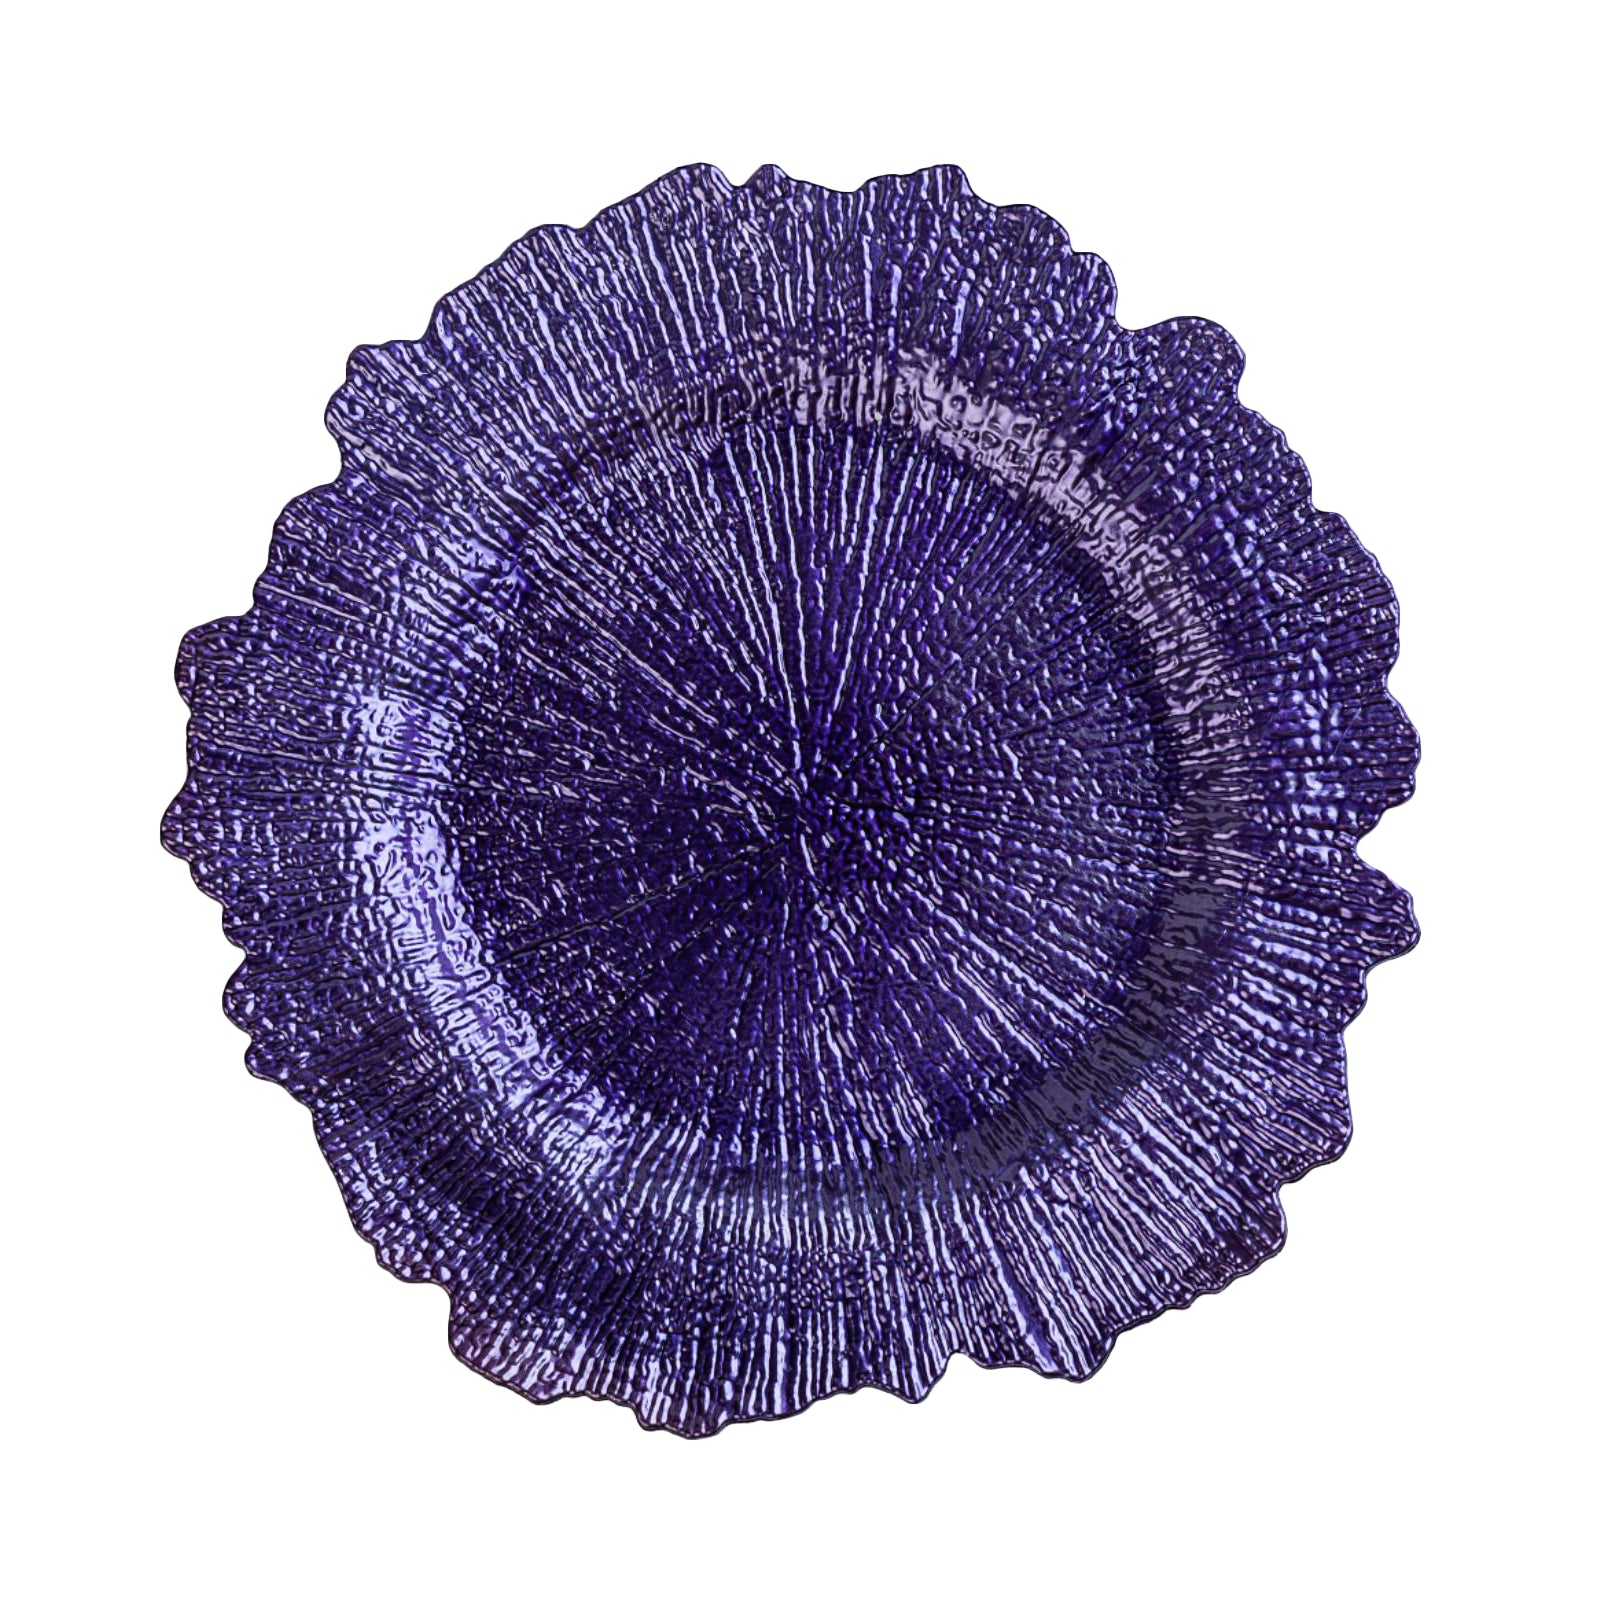 Reef Acrylic Plastic Charger Plate - Purple - CV Linens